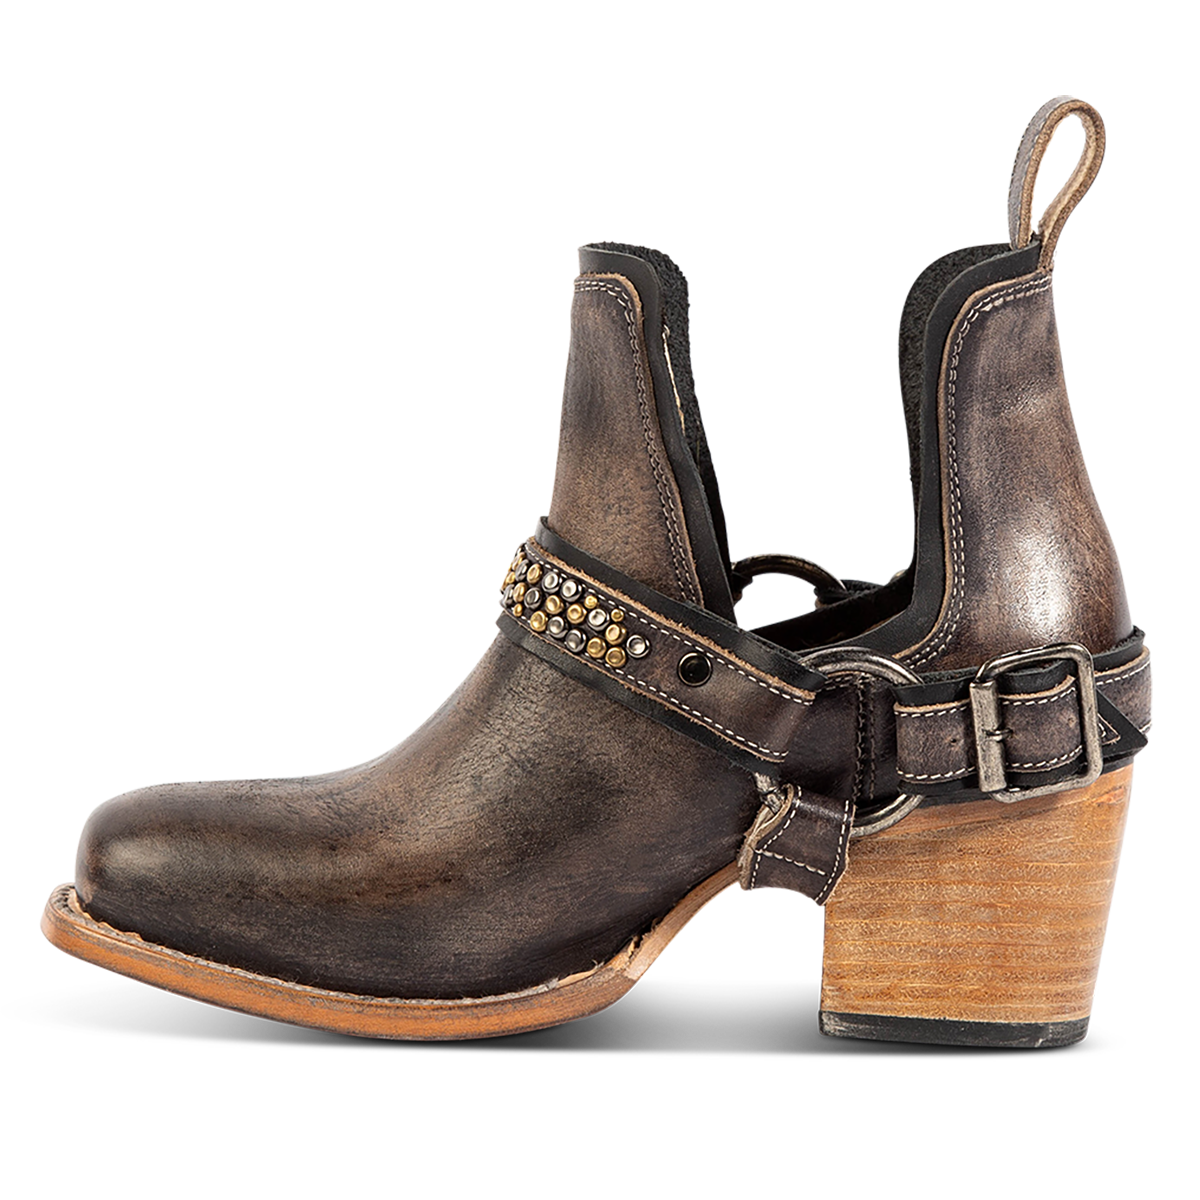 Inside view showing FREEBIRD women's Dusty black distressed bootie with studded embellishments, an ankle harness and a slip on leather pull strap